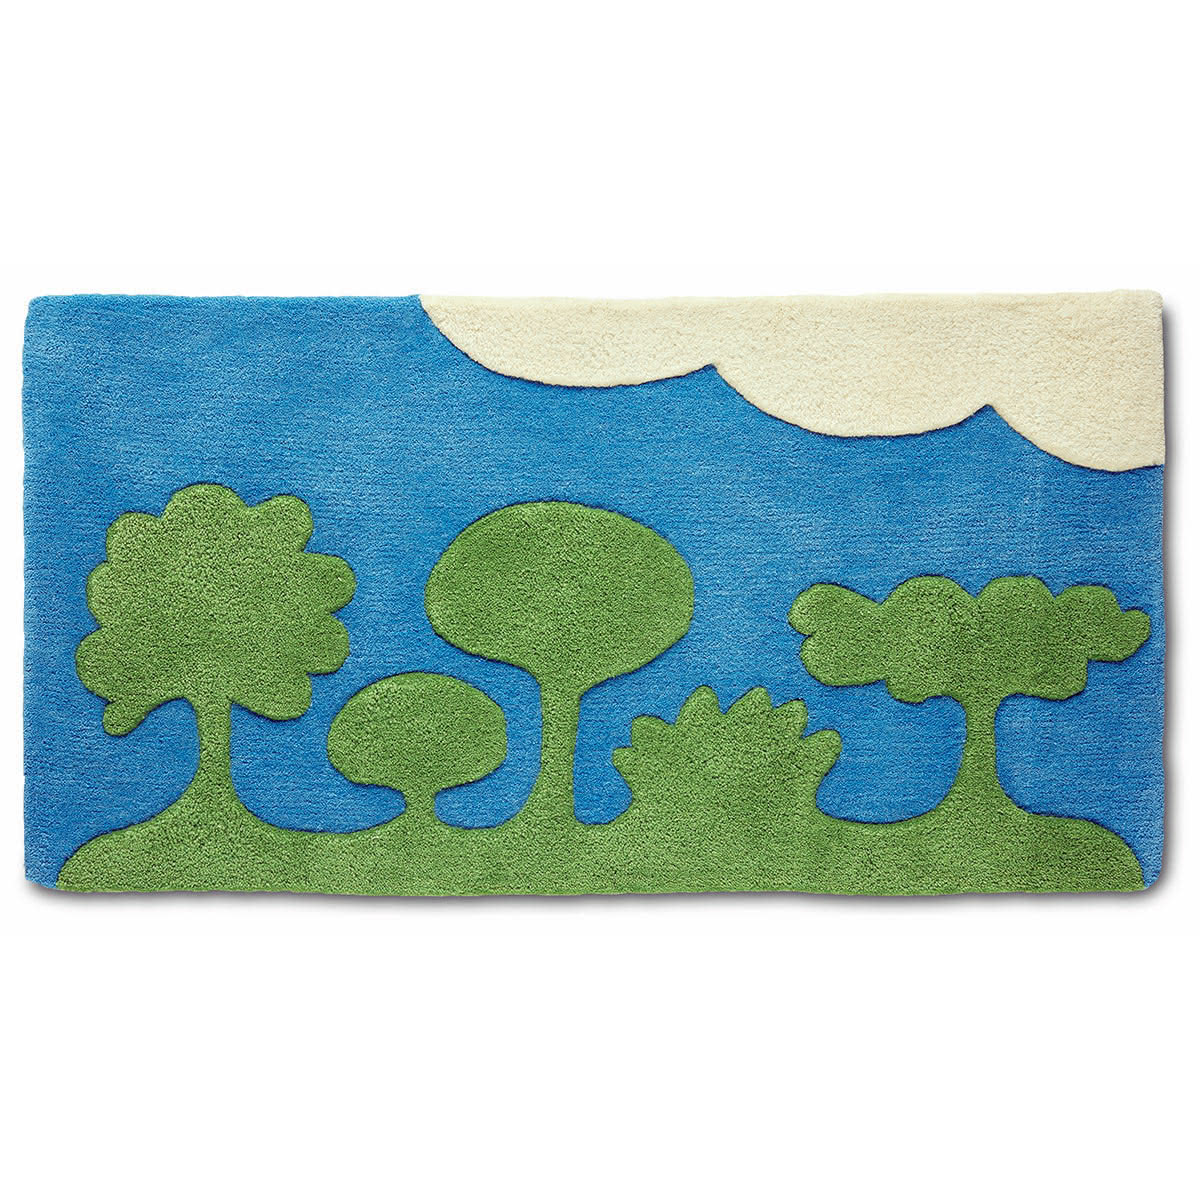 A small rug with green trees and blue sky.